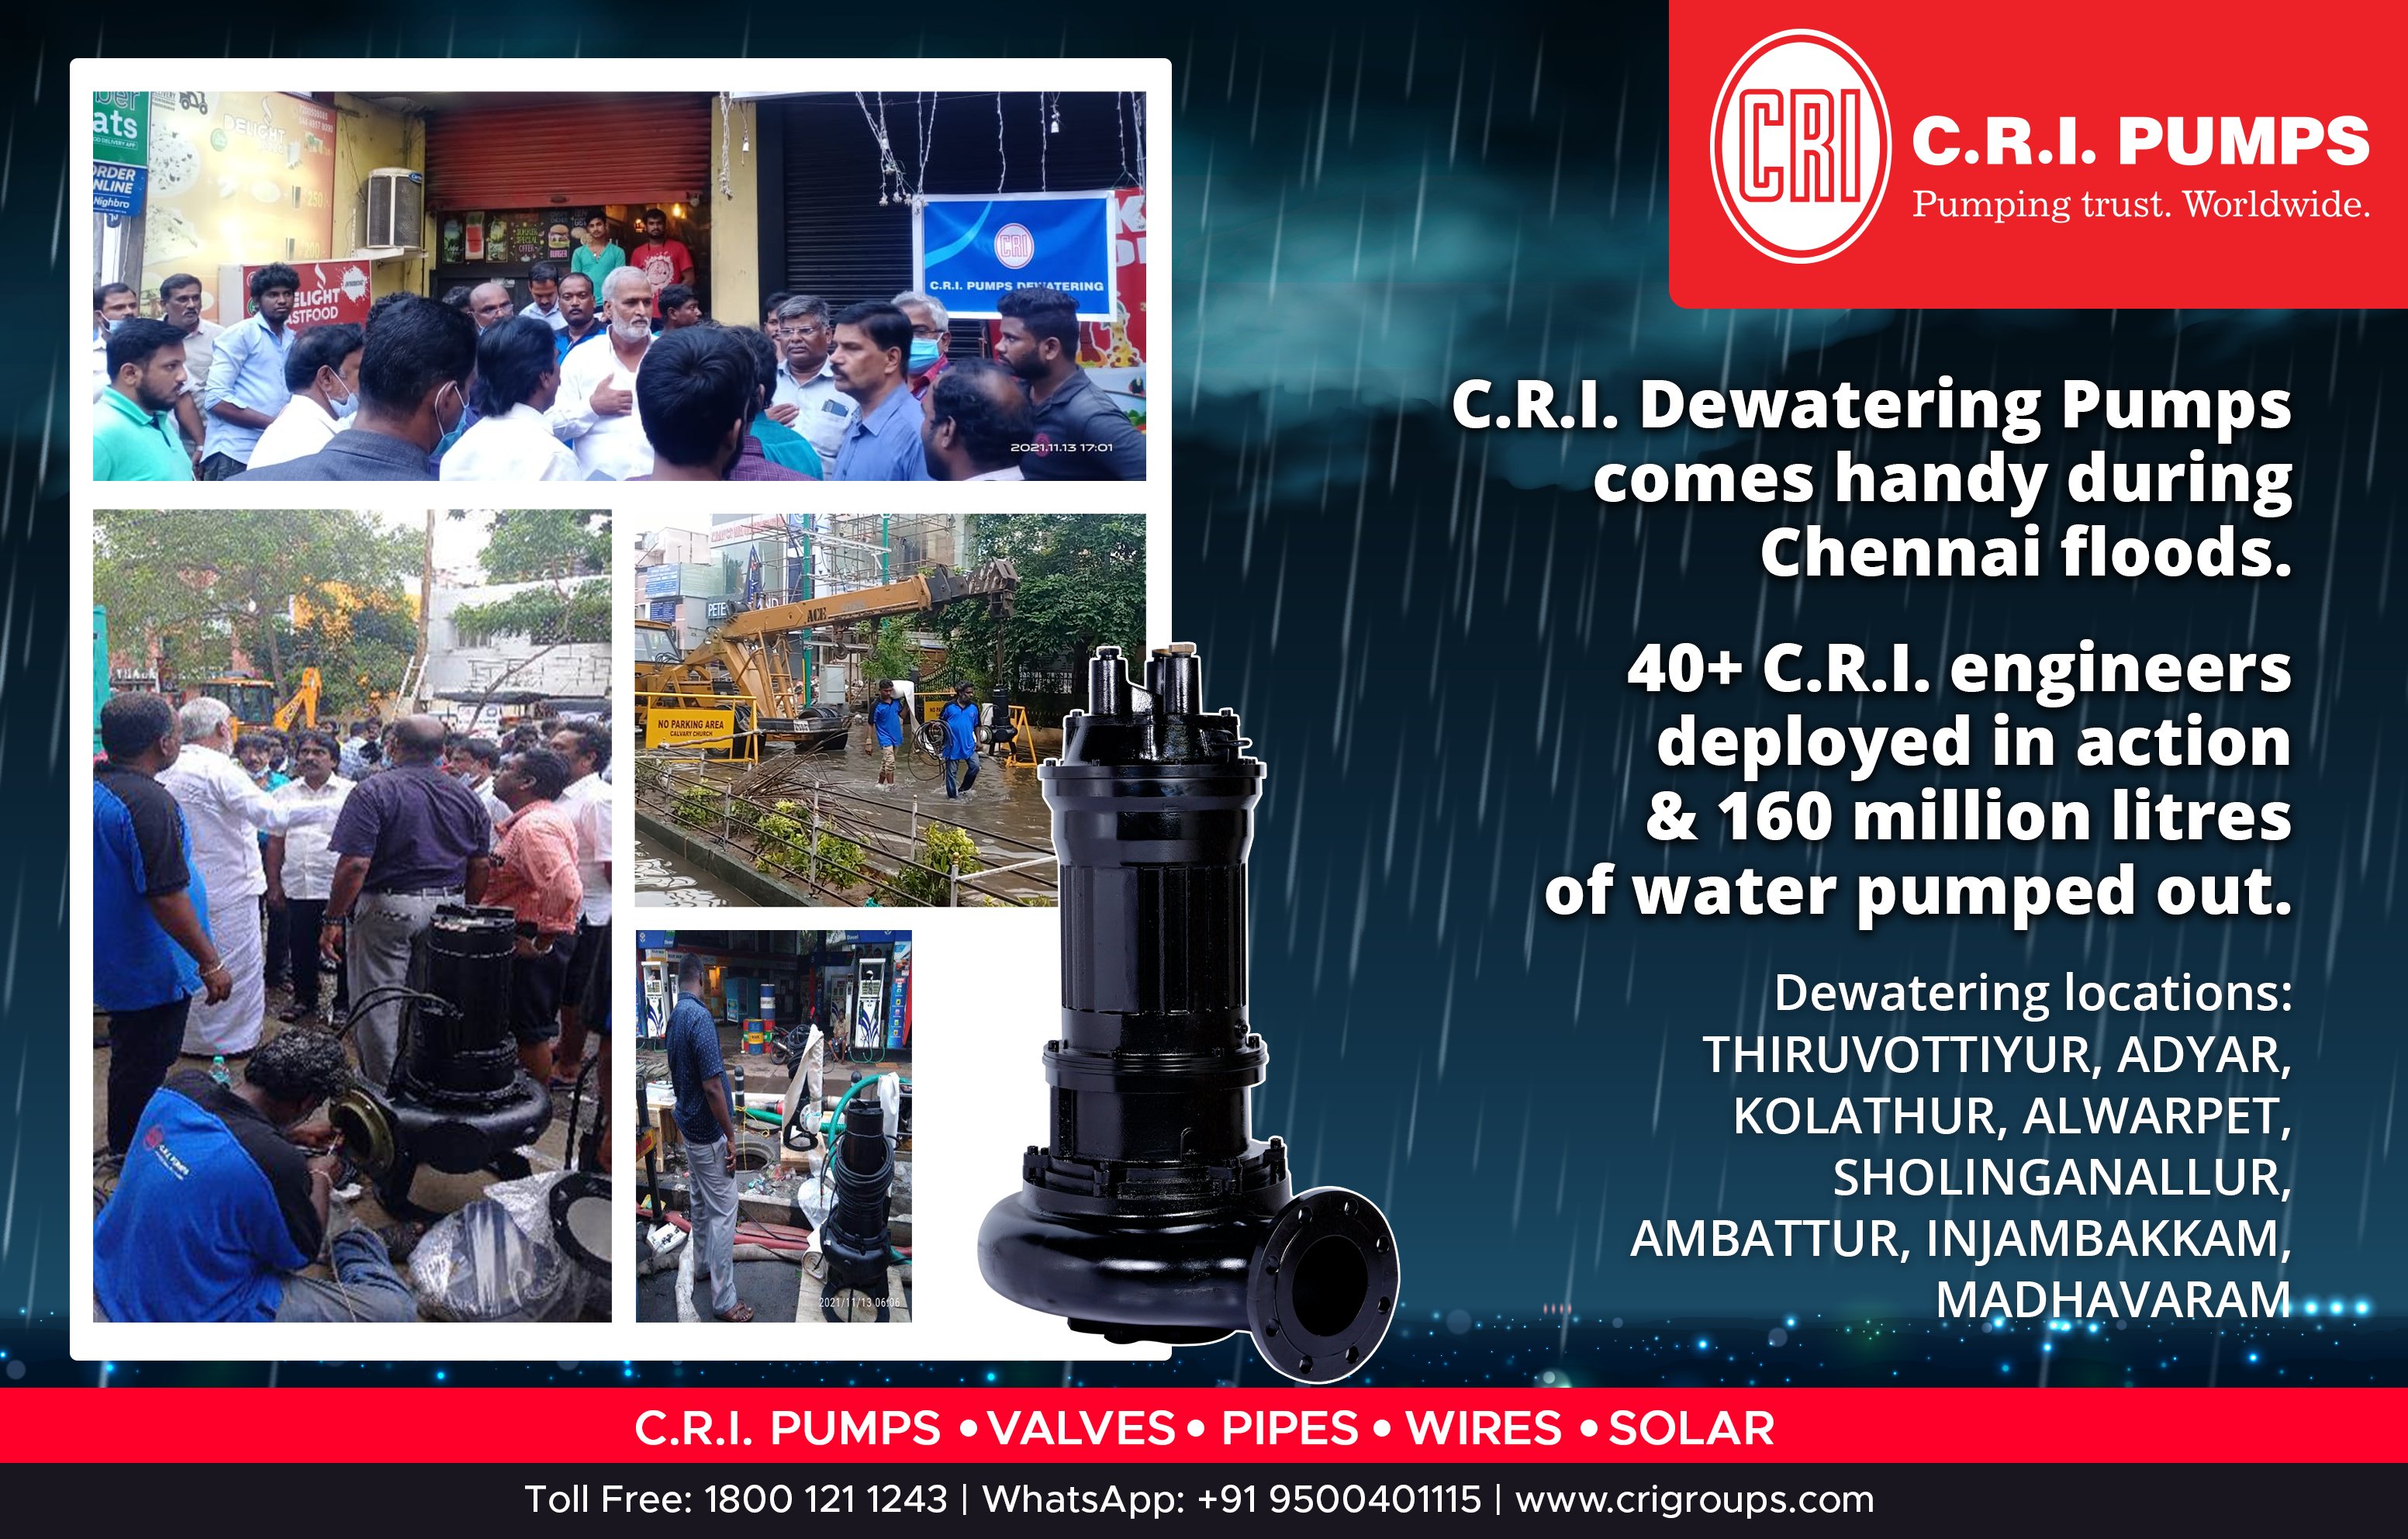 C.R.I. Group on Twitter: "#FloodAlert C.R.I. offers Dewatering Pumps to drain wastewater efficiently. During the recent massive #ChennaiRains 2021, about 160 million litres of wastewater has been out using C.R.I.'s Dewatering